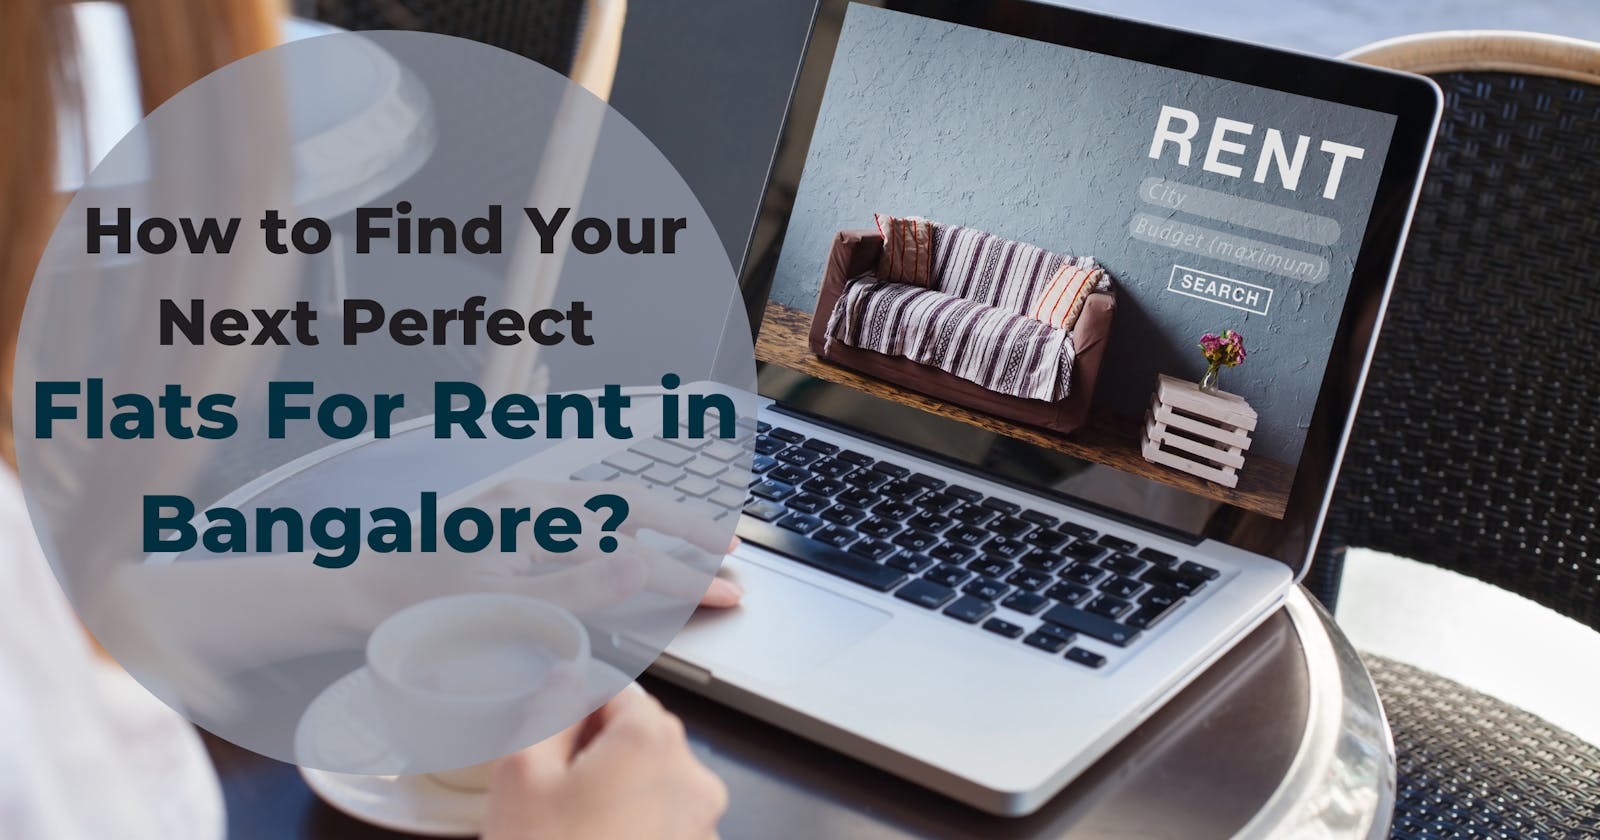 How to Find Your Next Perfect Flats For Rent in Bangalore?